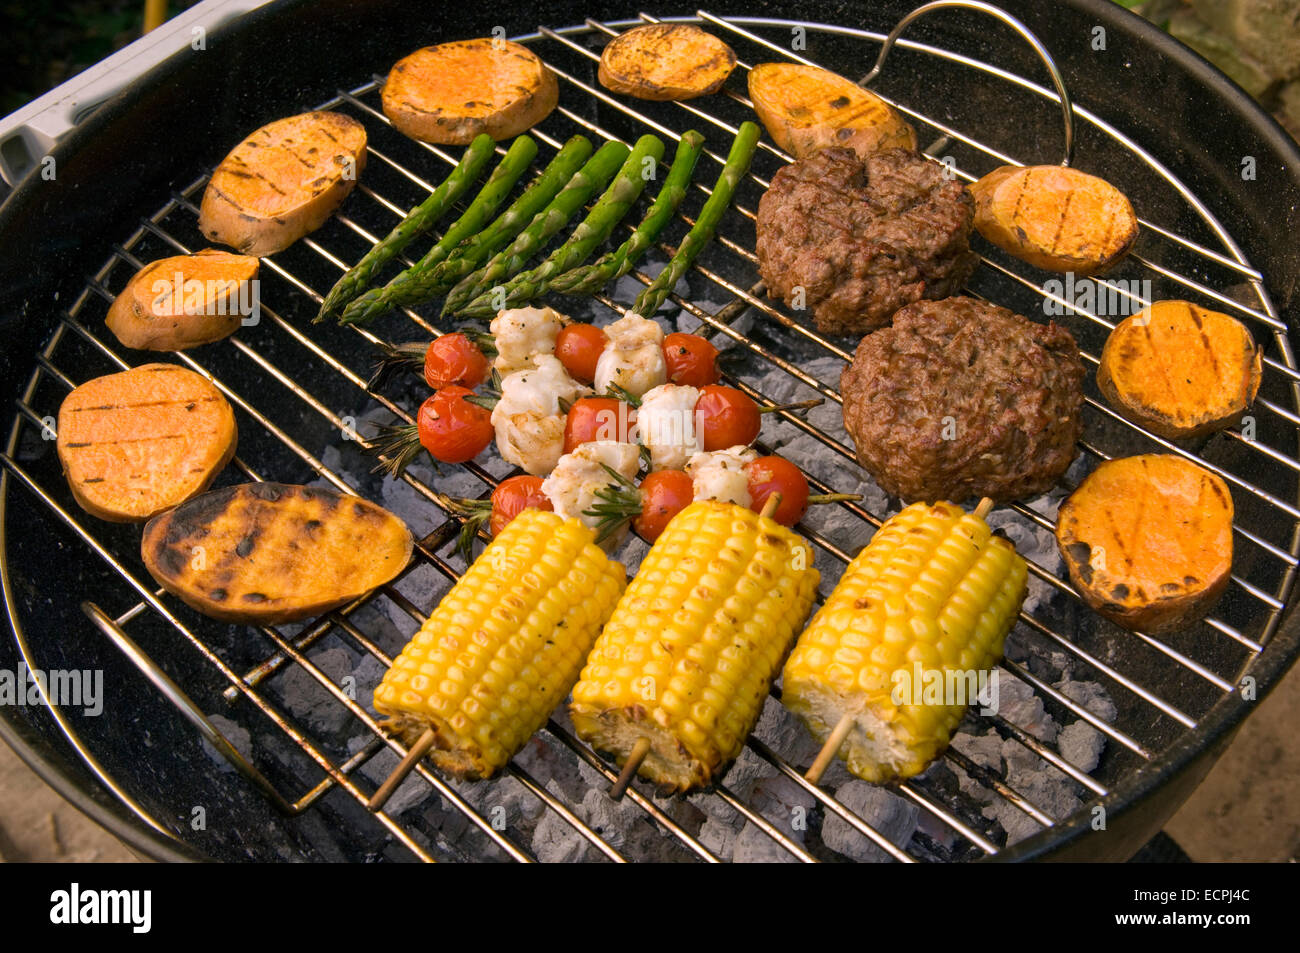 Barbeque foods Stock Photo